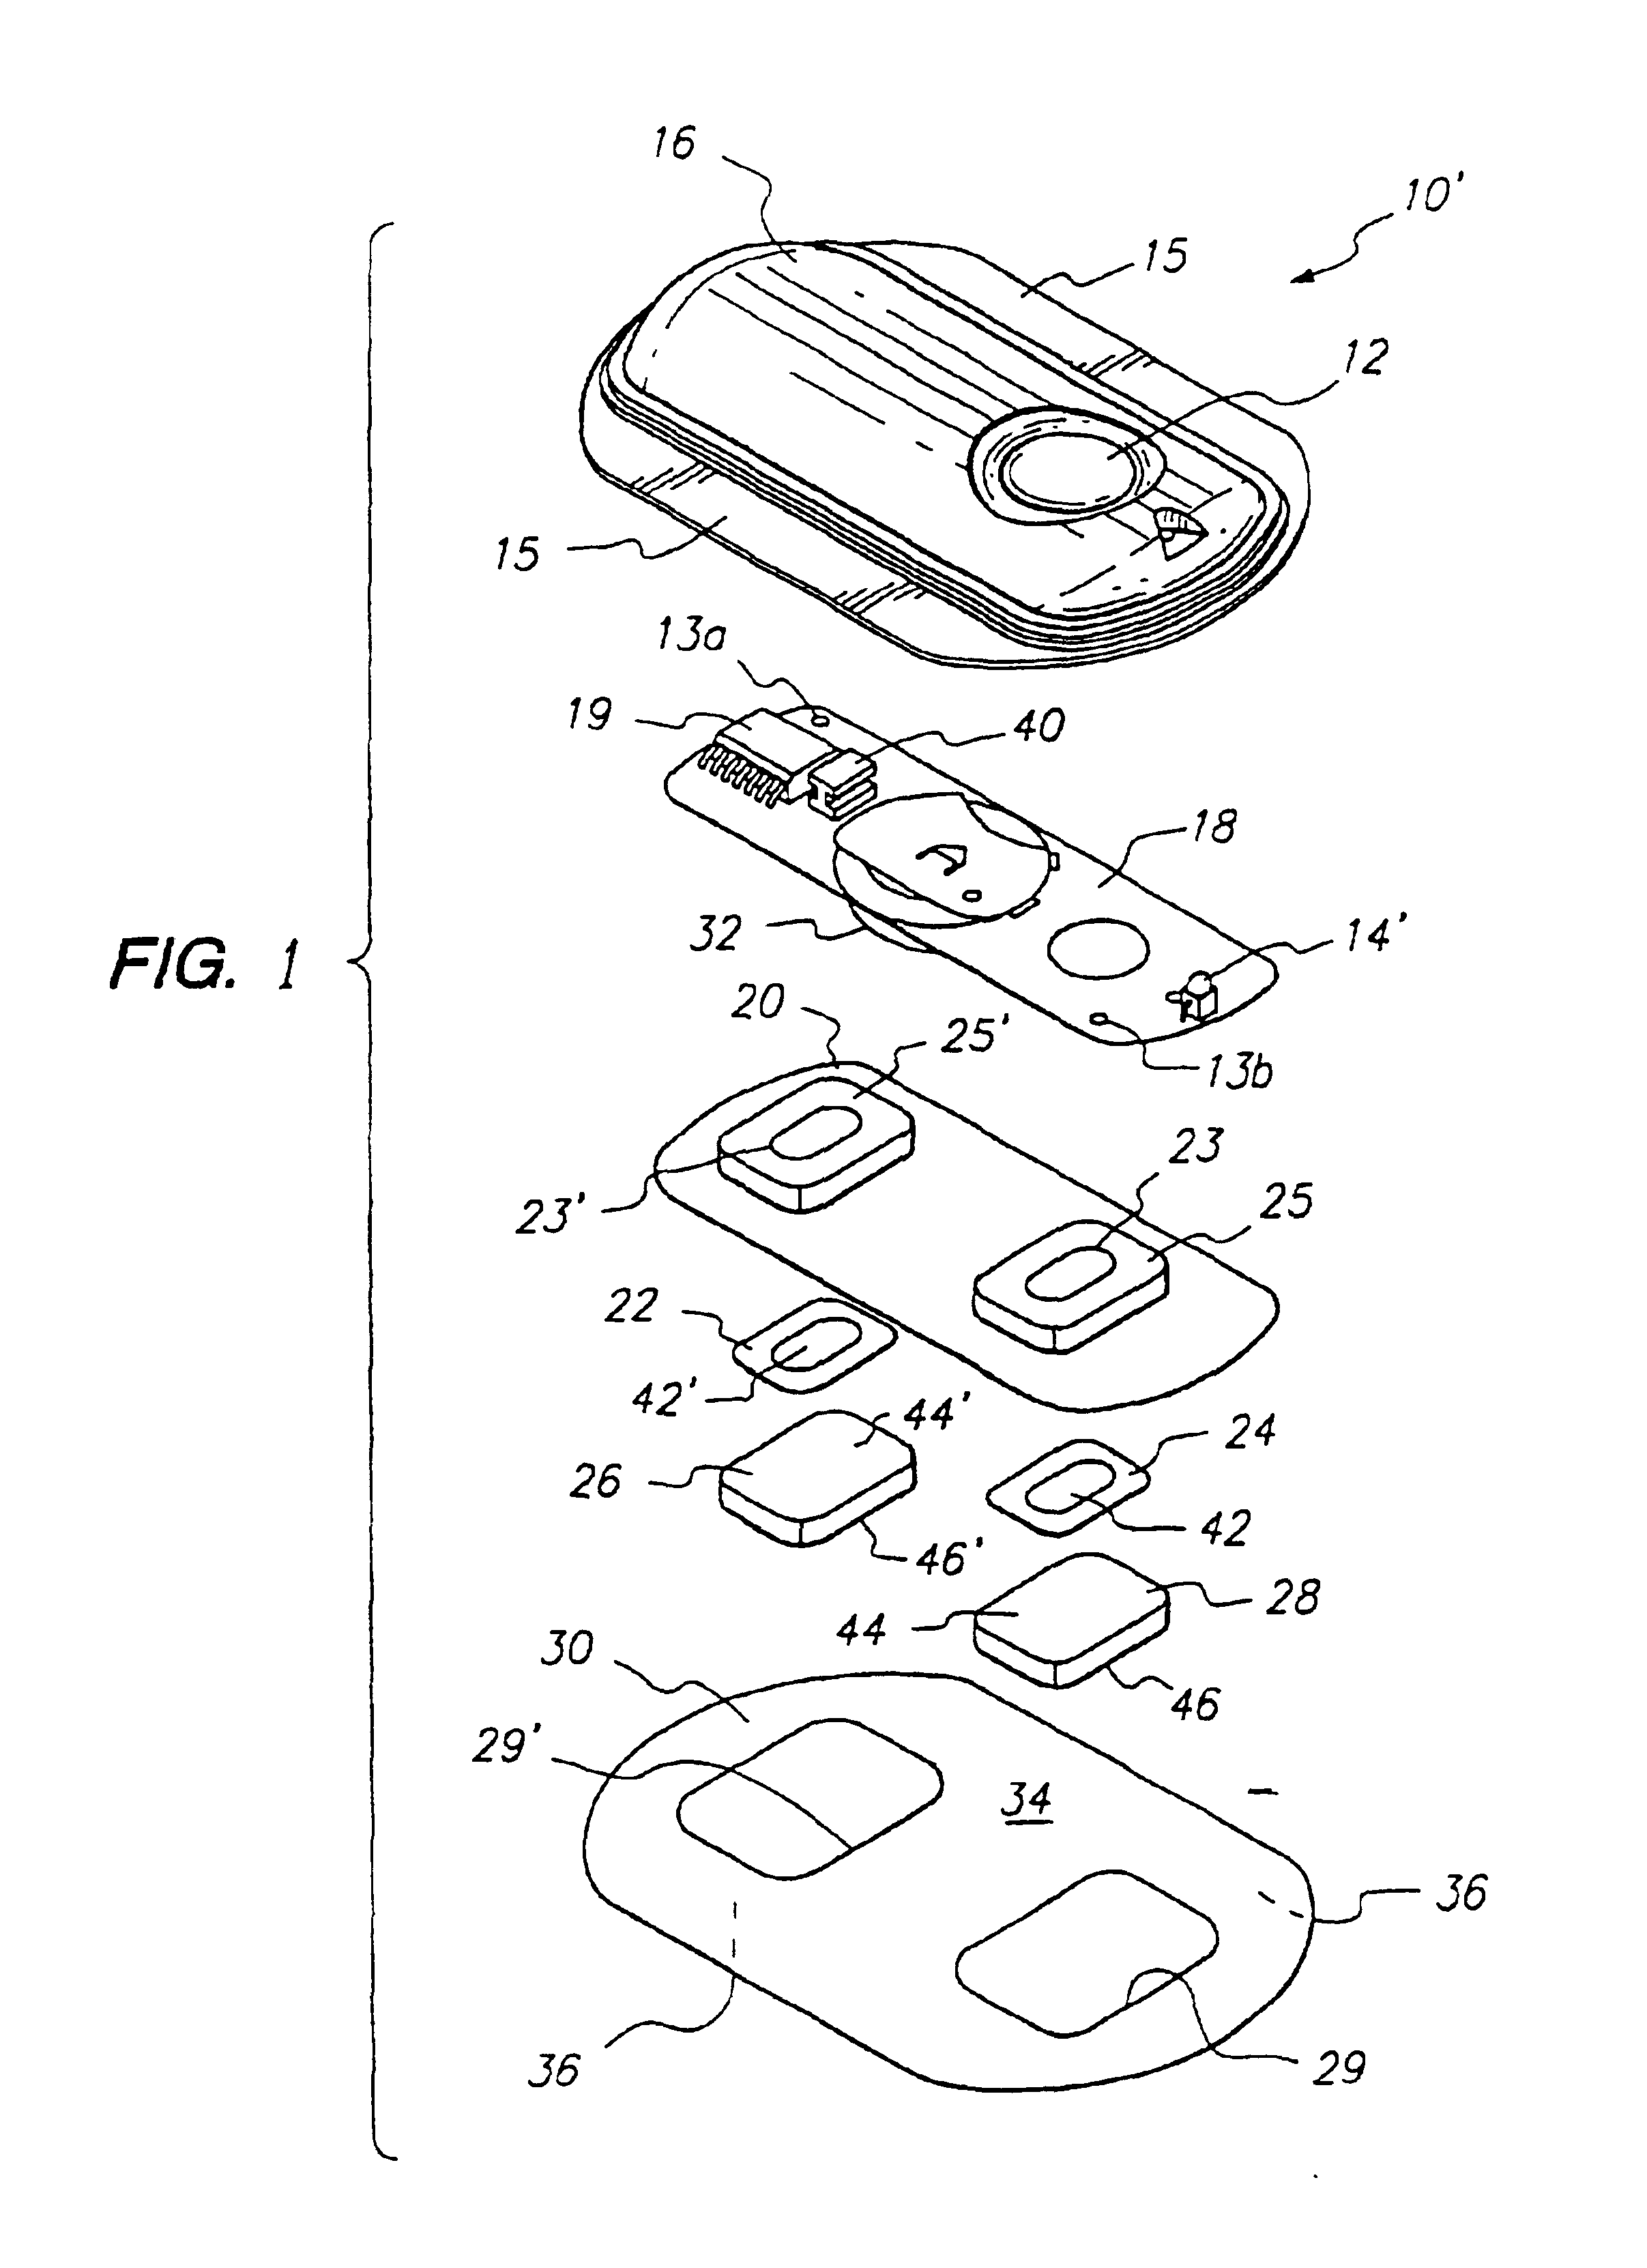 Transdermal electrotransport delivery device including an antimicrobial compatible reservoir composition